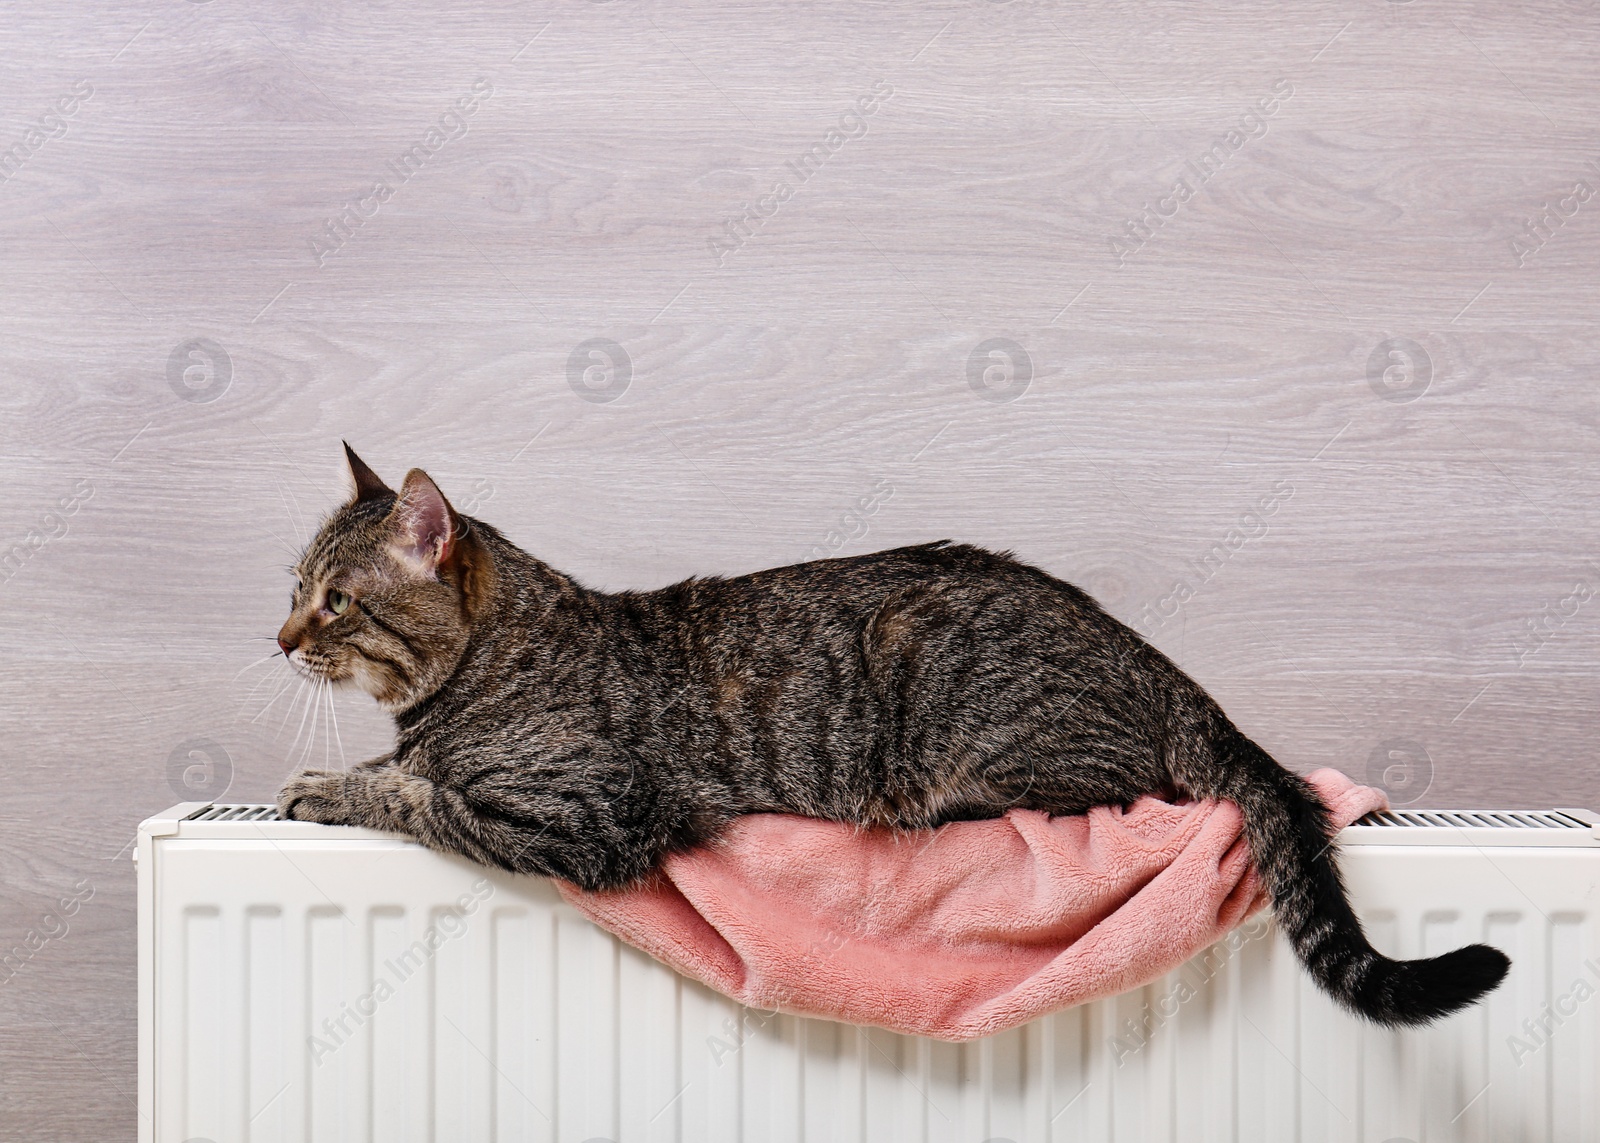 Photo of Cute tabby cat on heating radiator with plaid near light wooden wall